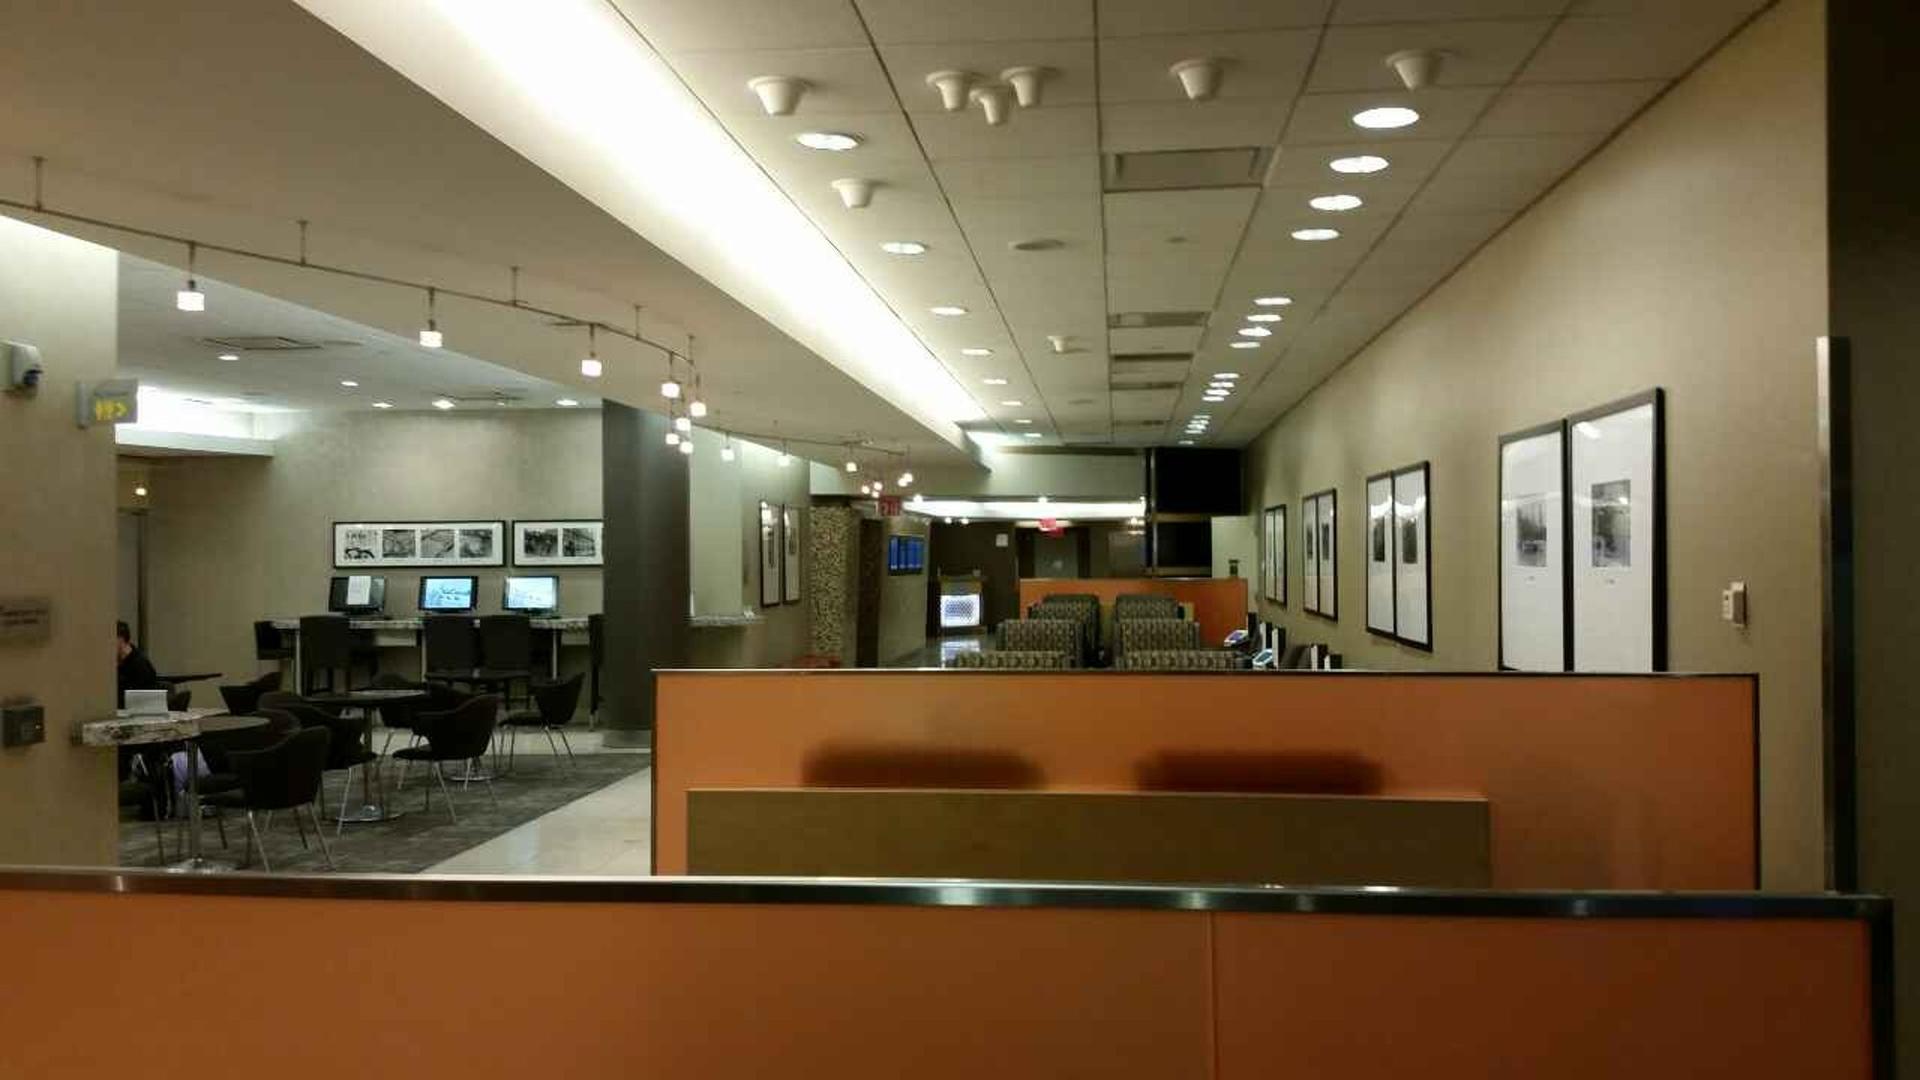 American Airlines Admirals Club image 5 of 25